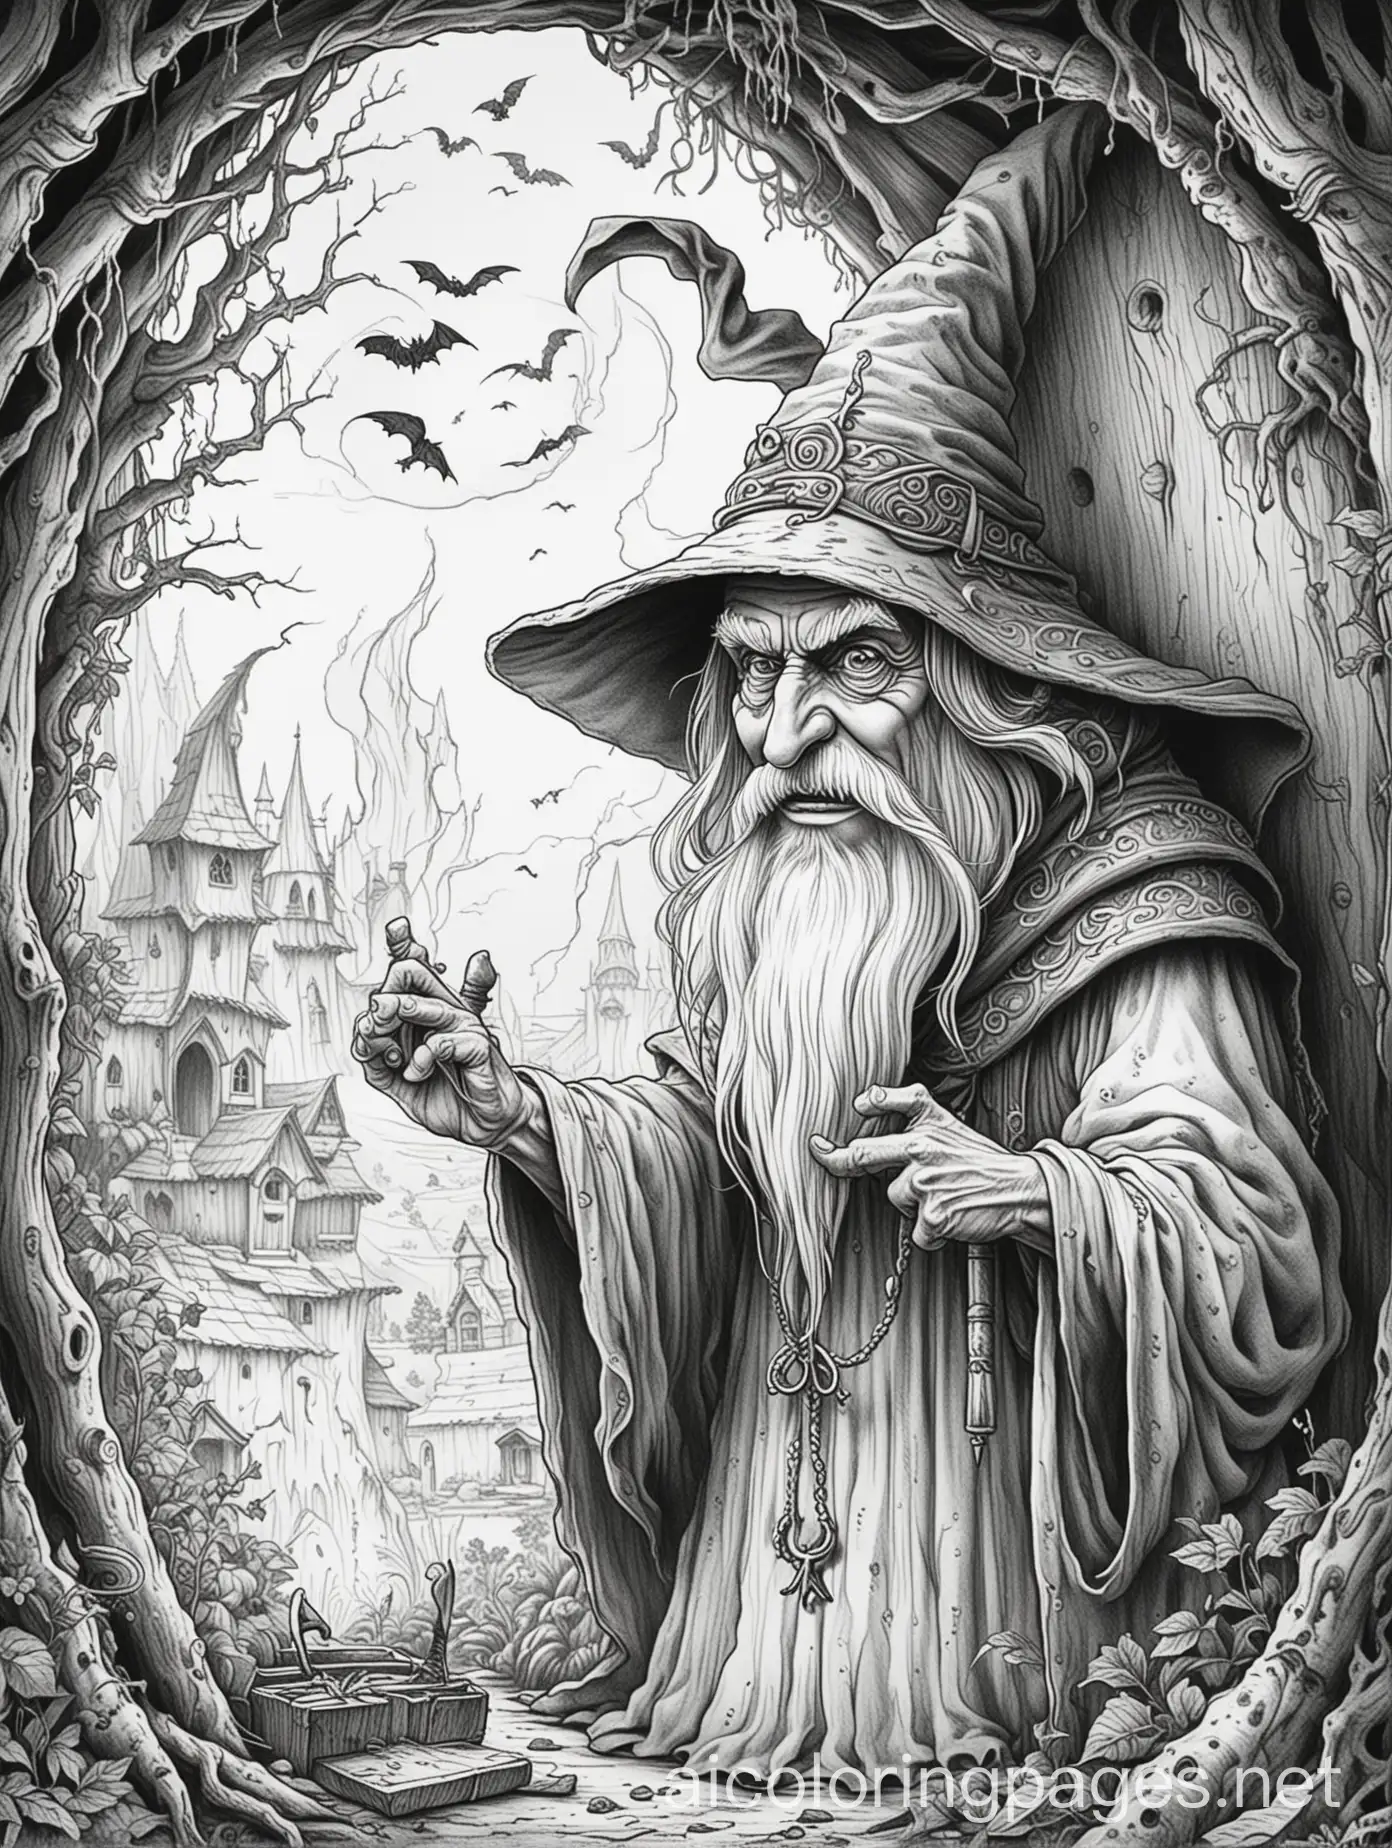 a scary wizard in a hut casting a spell, Coloring Page, black and white, line art, white background, Simplicity, Ample White Space. The background of the coloring page is plain white to make it easy for young children to color within the lines. The outlines of all the subjects are easy to distinguish, making it simple for kids to color without too much difficulty